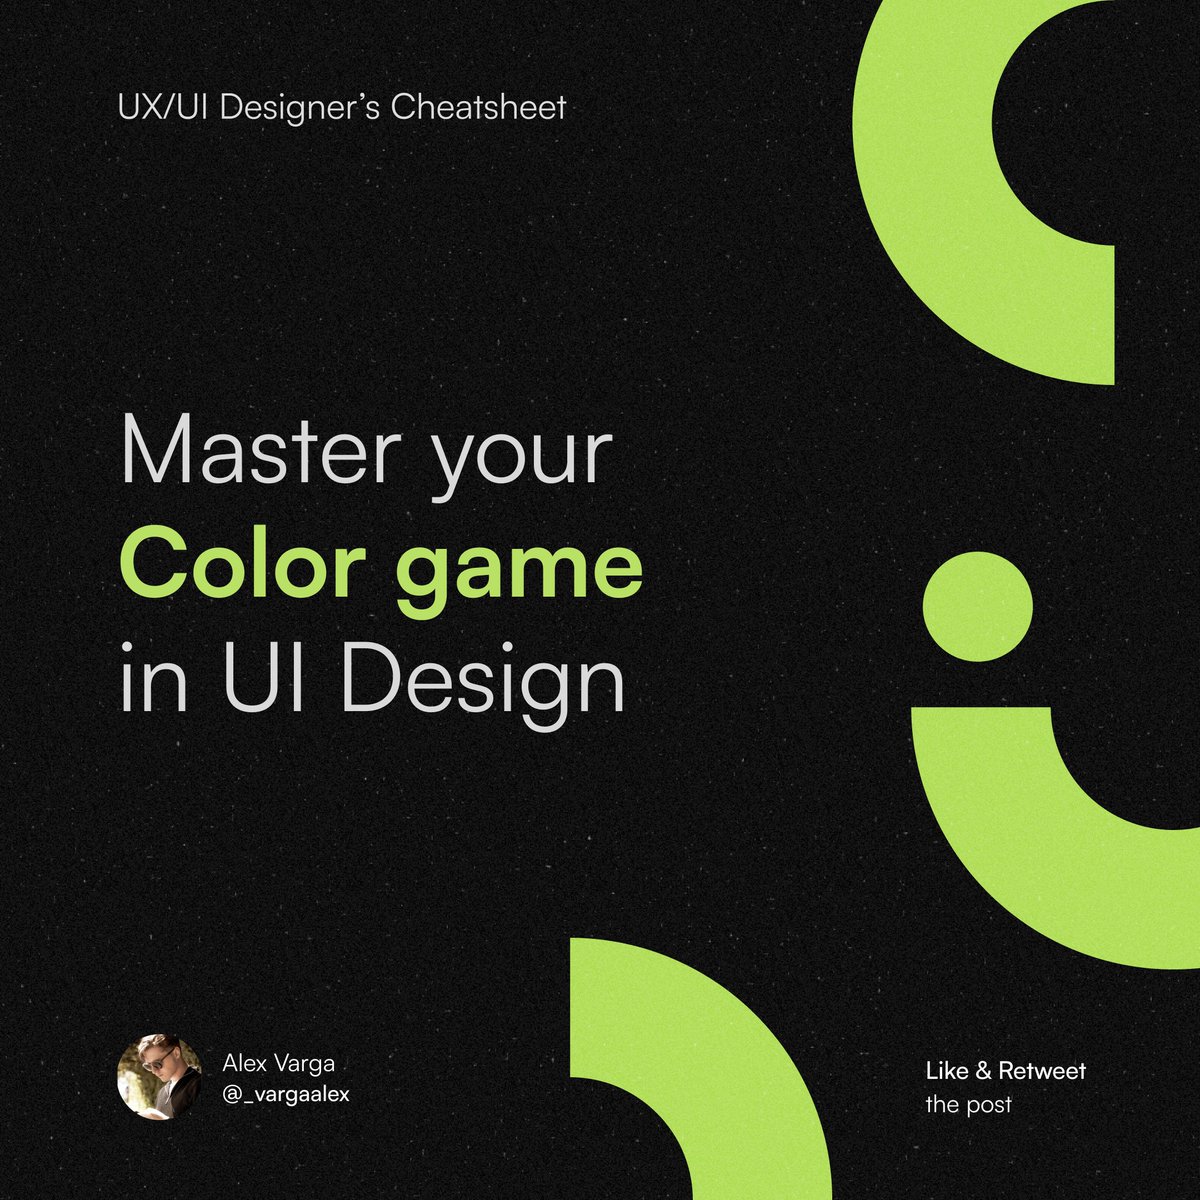 Mastering your Color Game as a UX/UI Designer 🎨

Thread 🧵